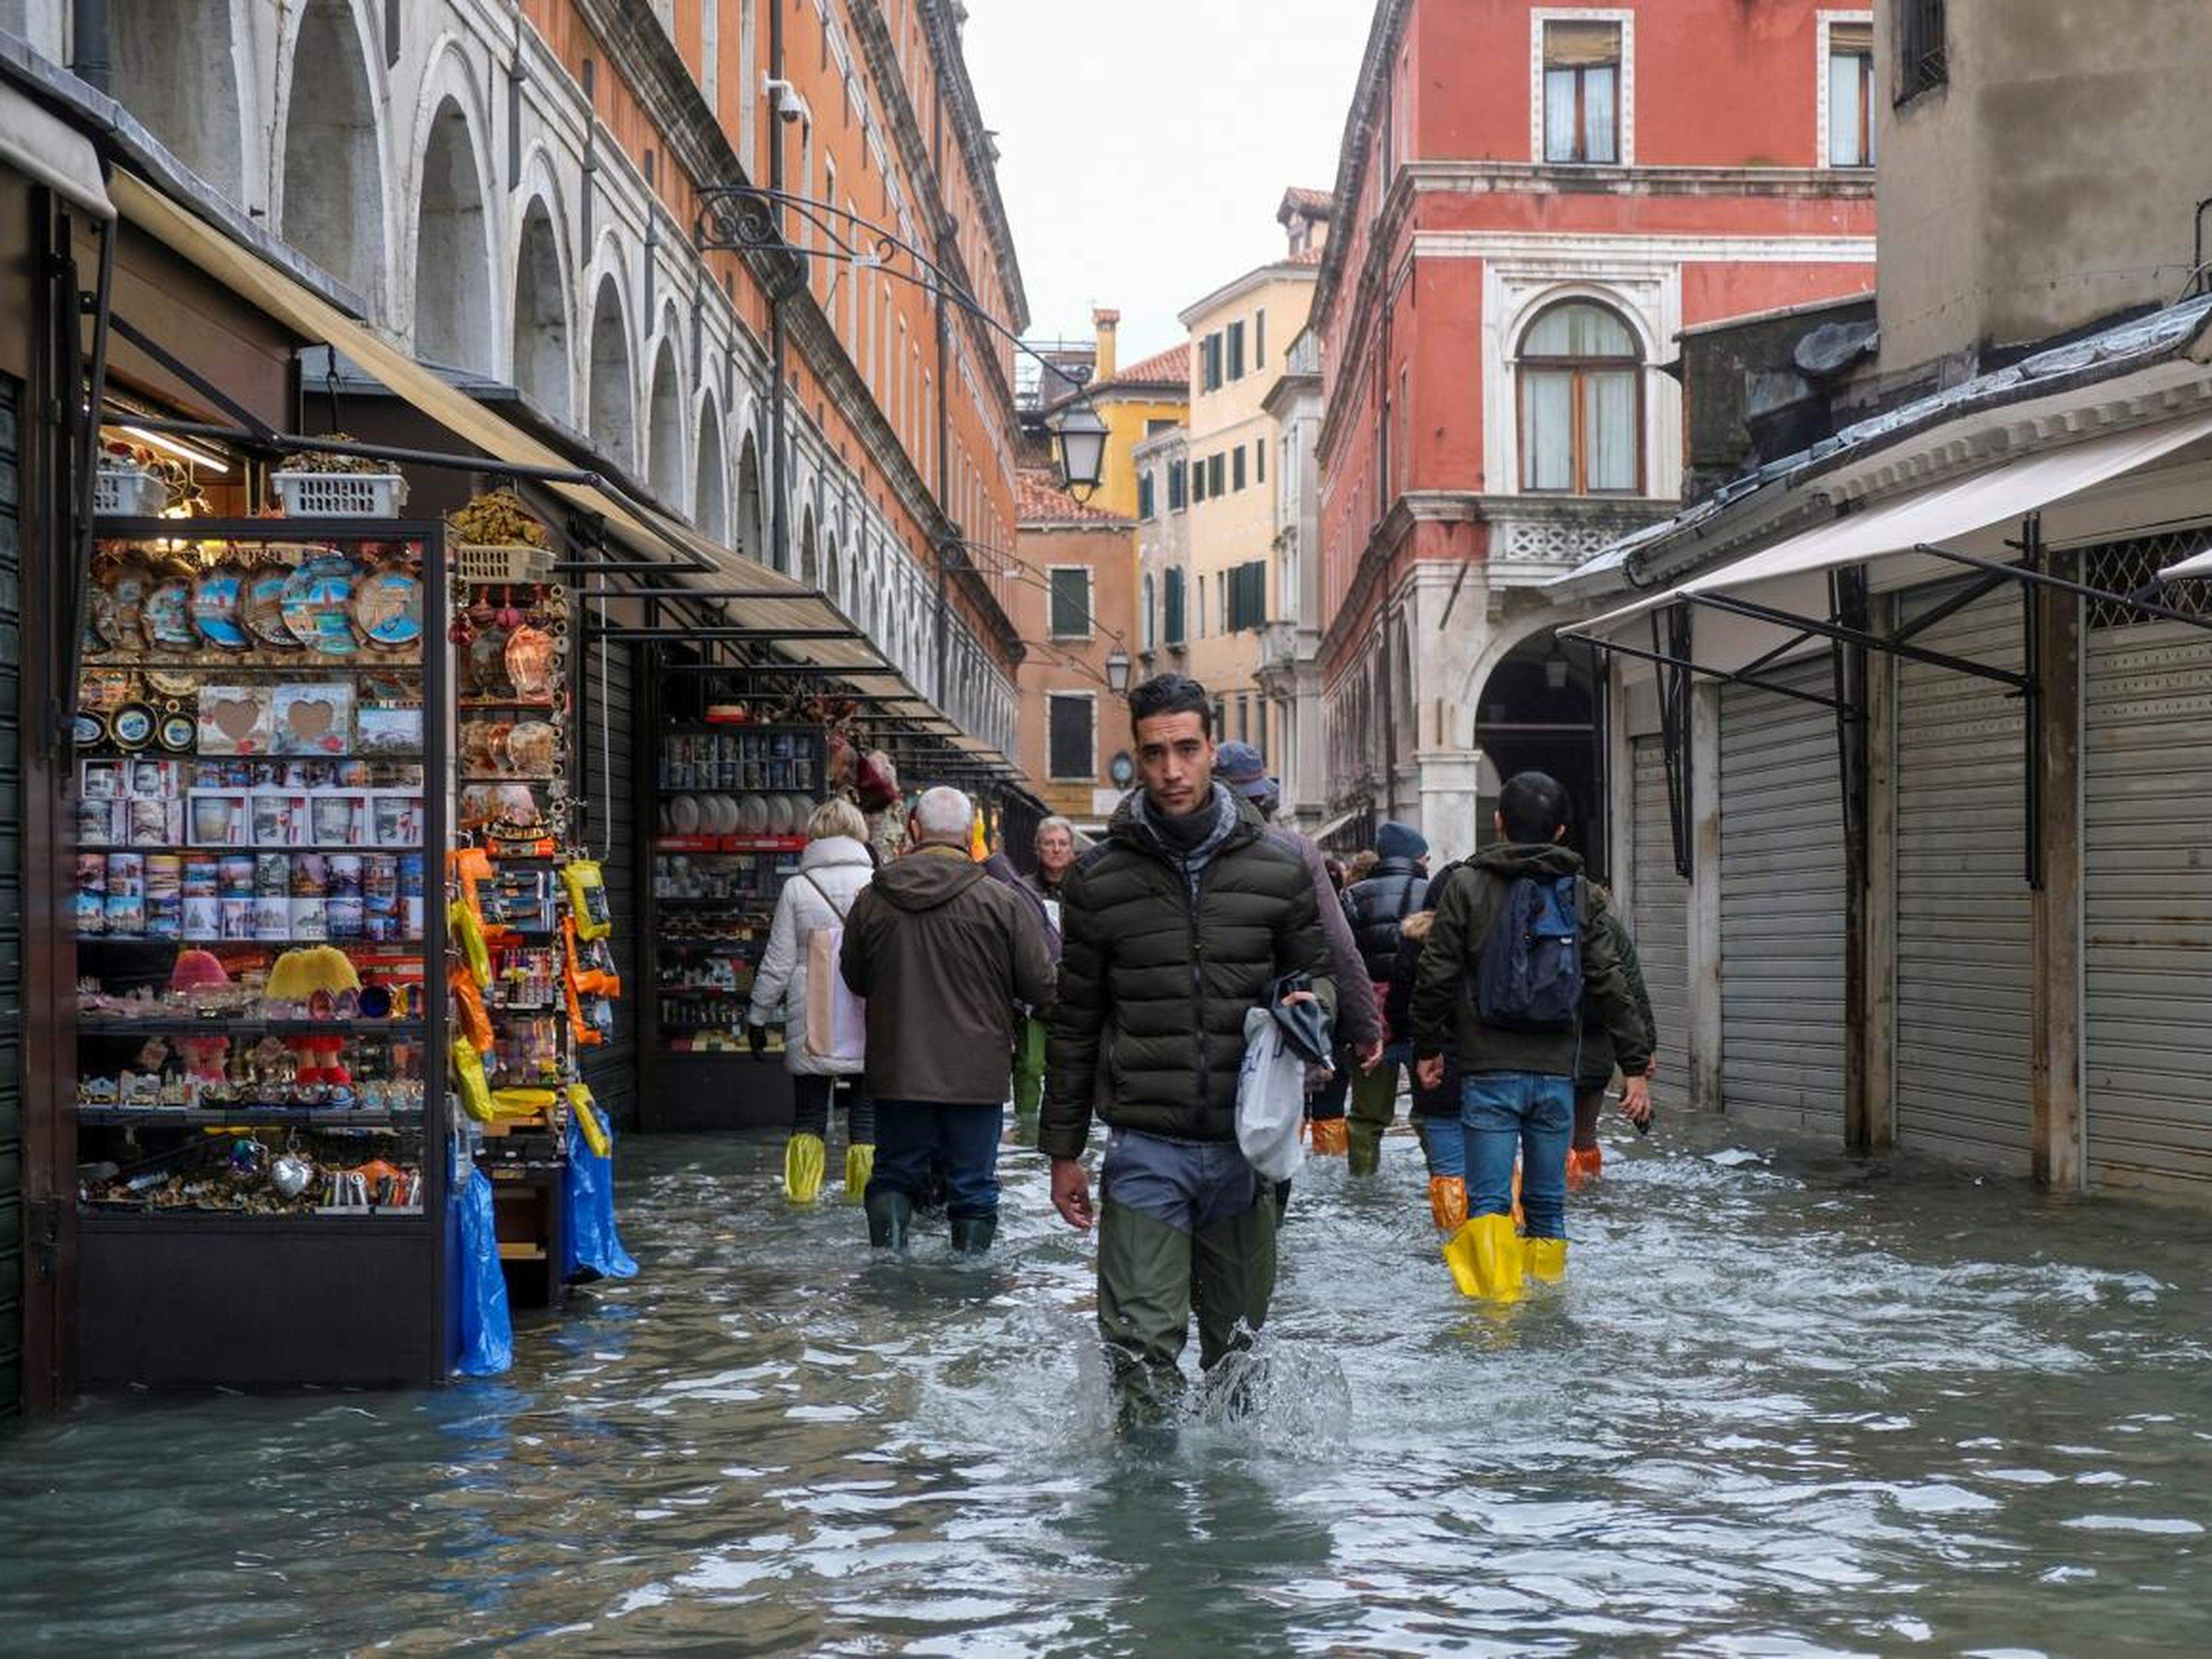 That will lead to more sea-level rise — about 0.3 to 0.6 feet on average globally by 2030, according to the US' National Climate Assessment.